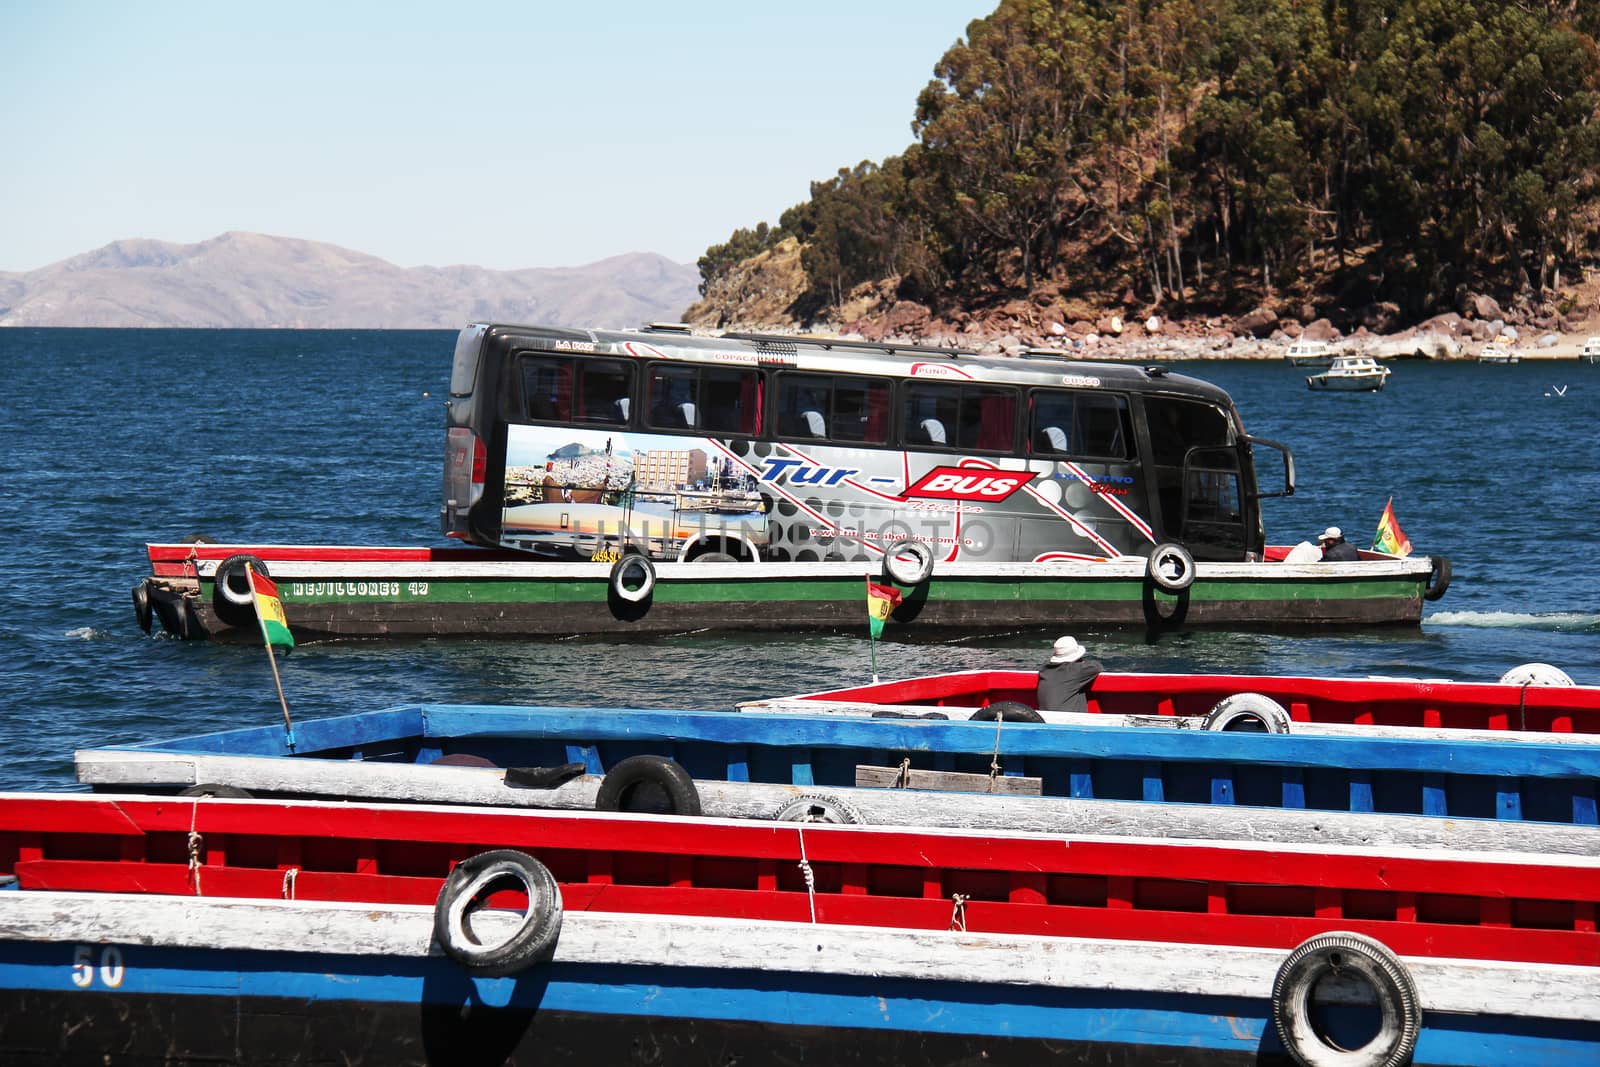 Tiquina, Bolivia - September 28, 2010: Bus crossing lake Titicaca on a raft while passangers take the boat